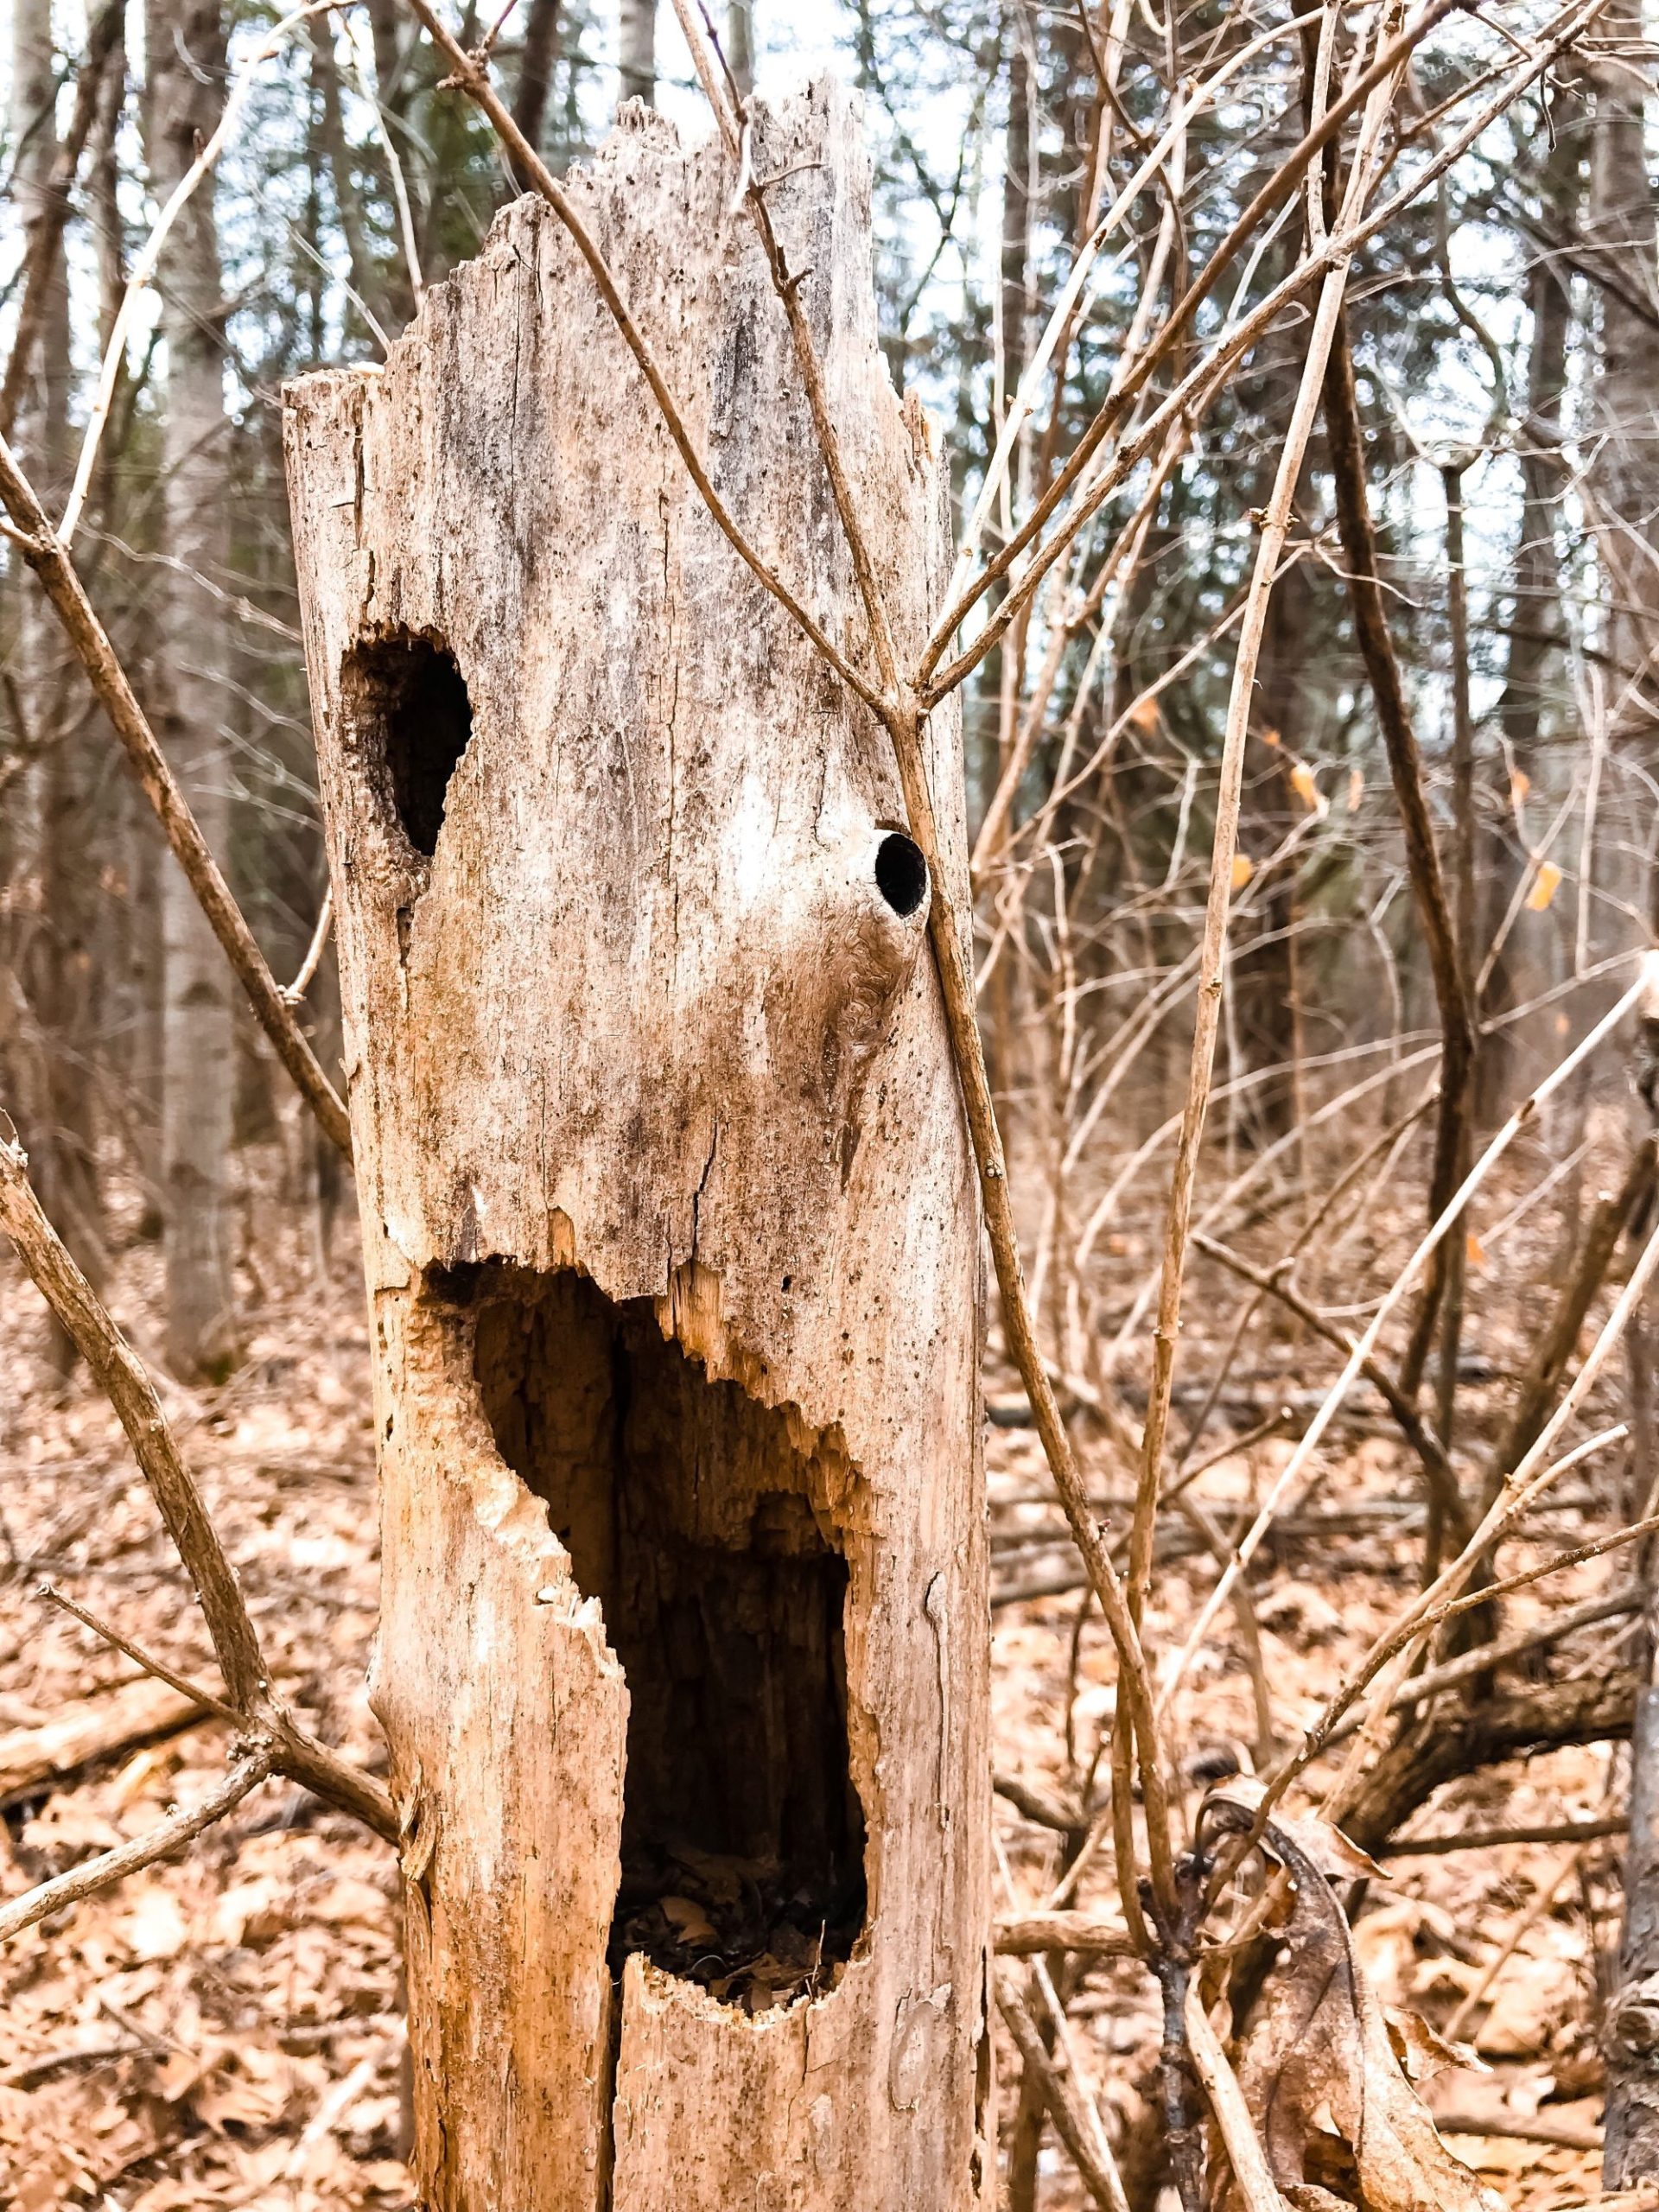 a dead tree or snag in a forest